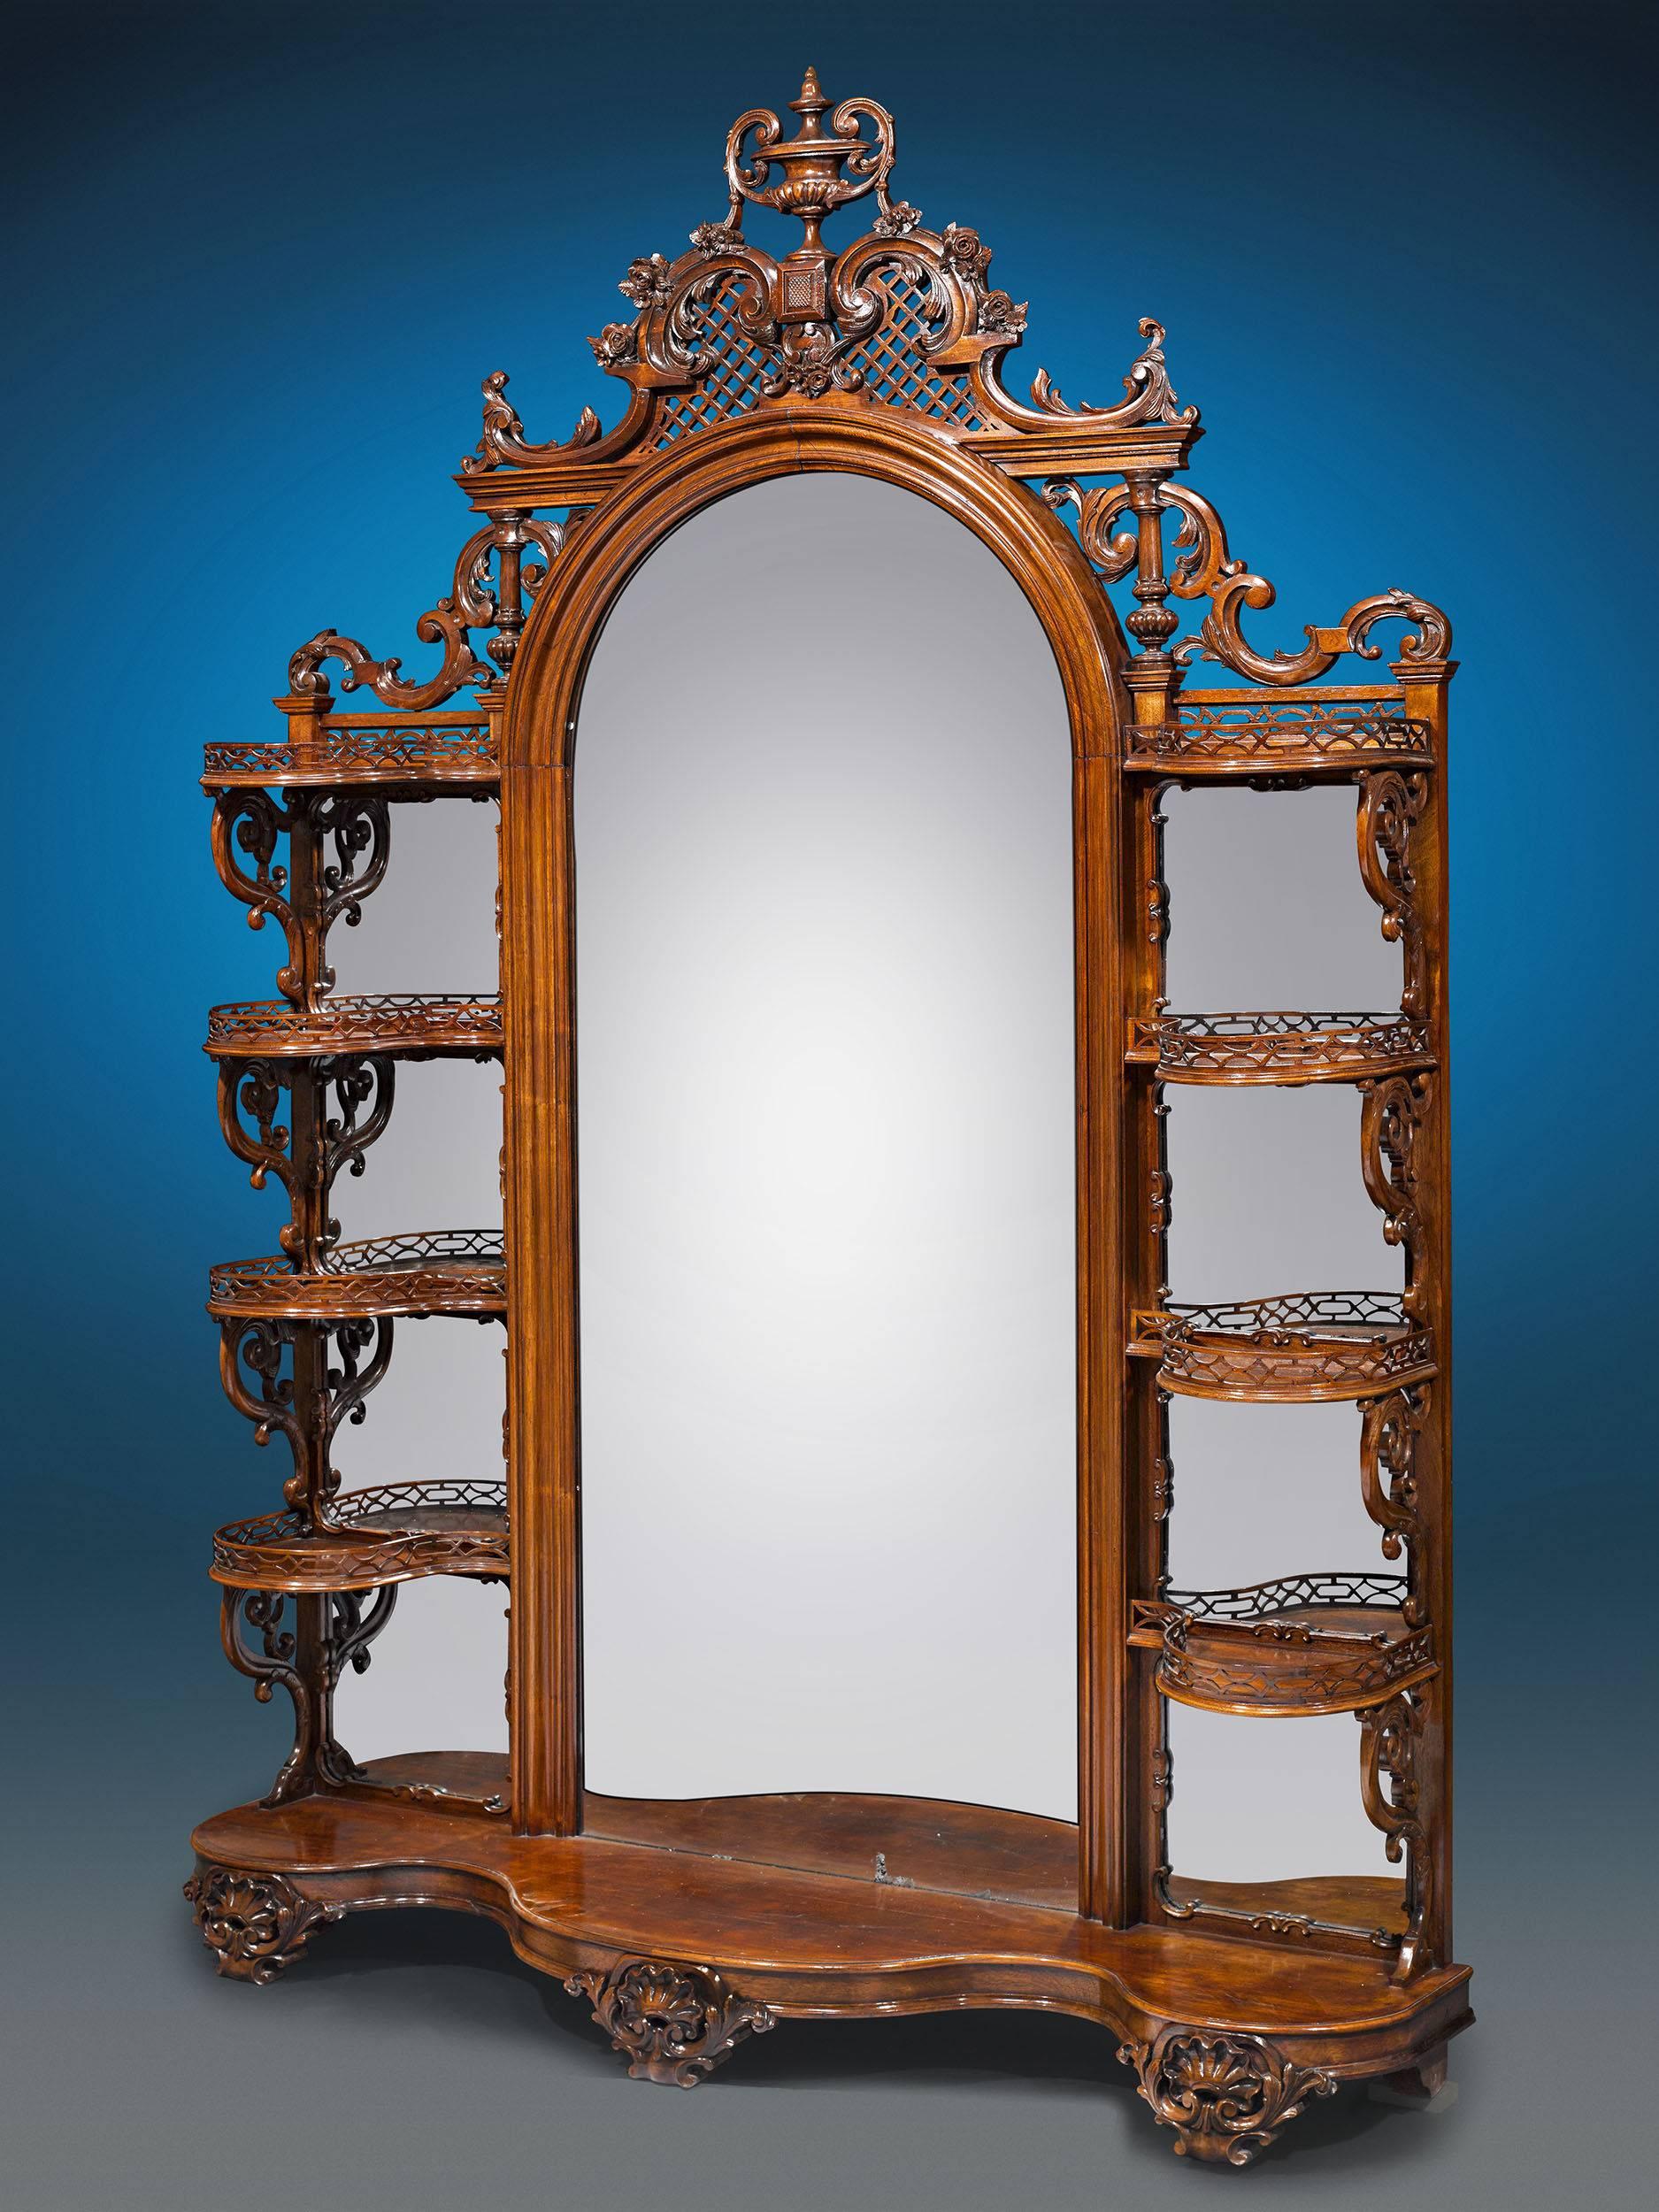 This magnificent rosewood American Rococo Revival étagère is attributed to Alexander Roux, a French immigrant to New York noted for his innovative and fashionable designs. This particular example boasts carving and open latticework along the